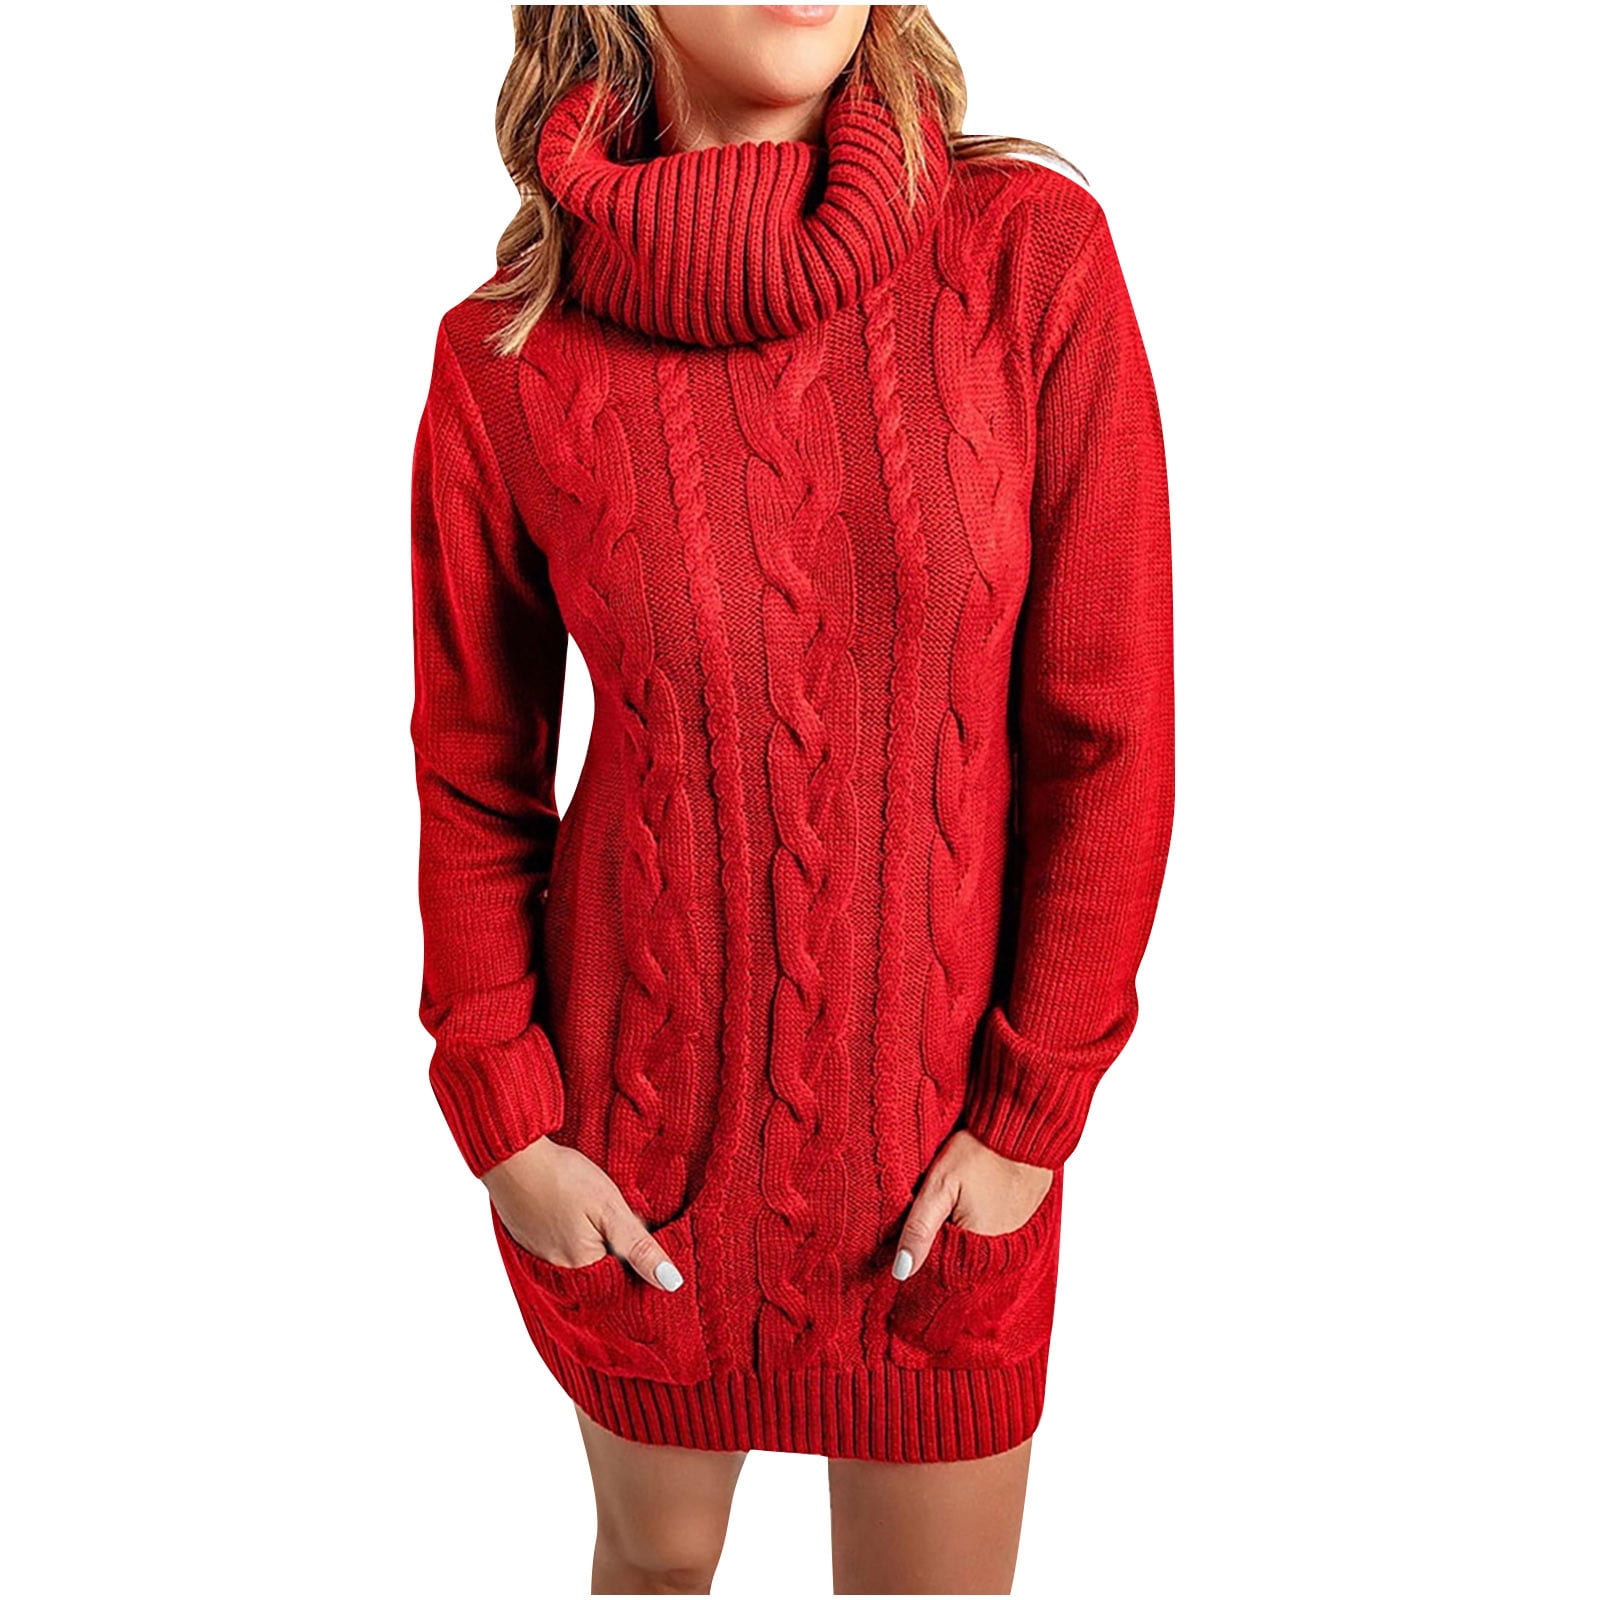 Women's Even&Odd Tricot dress, size 36 (Red)